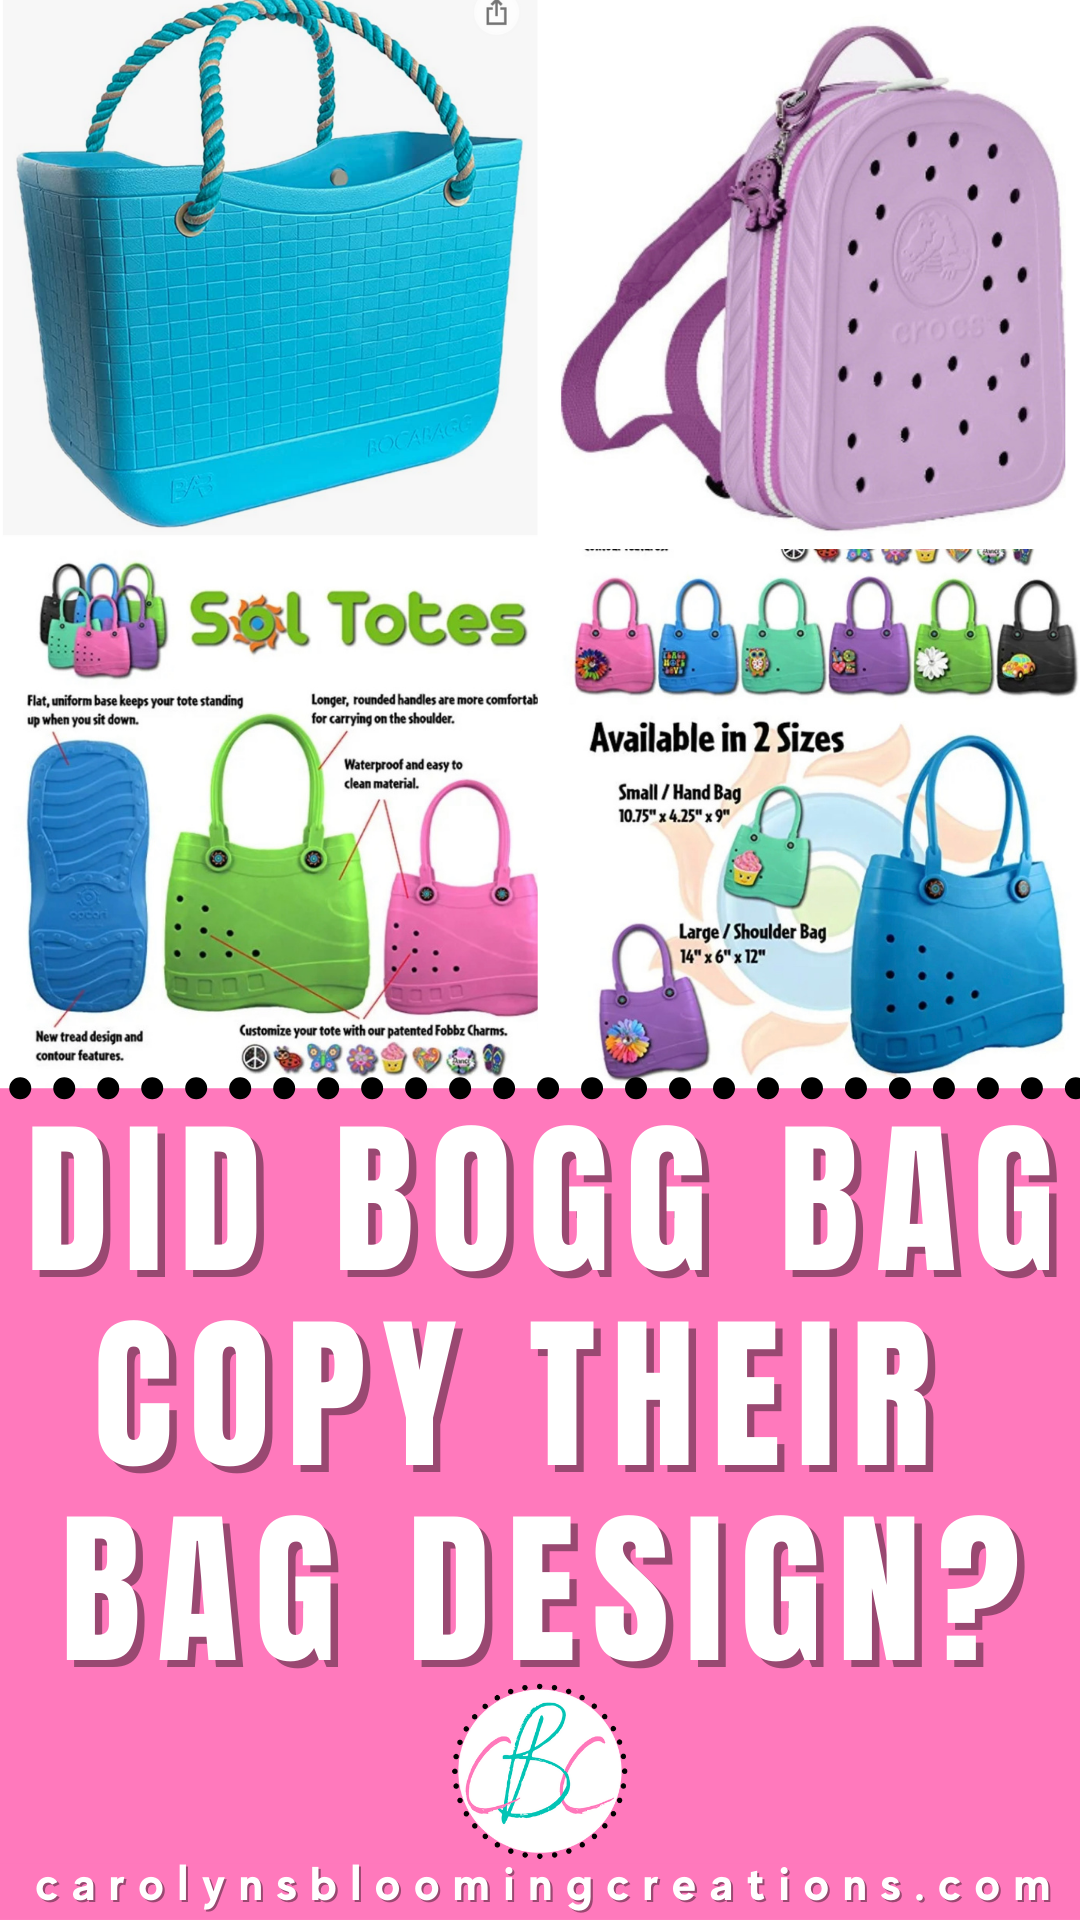 Bogg Bag Lookalikes - Where to Buy at the Best Prices